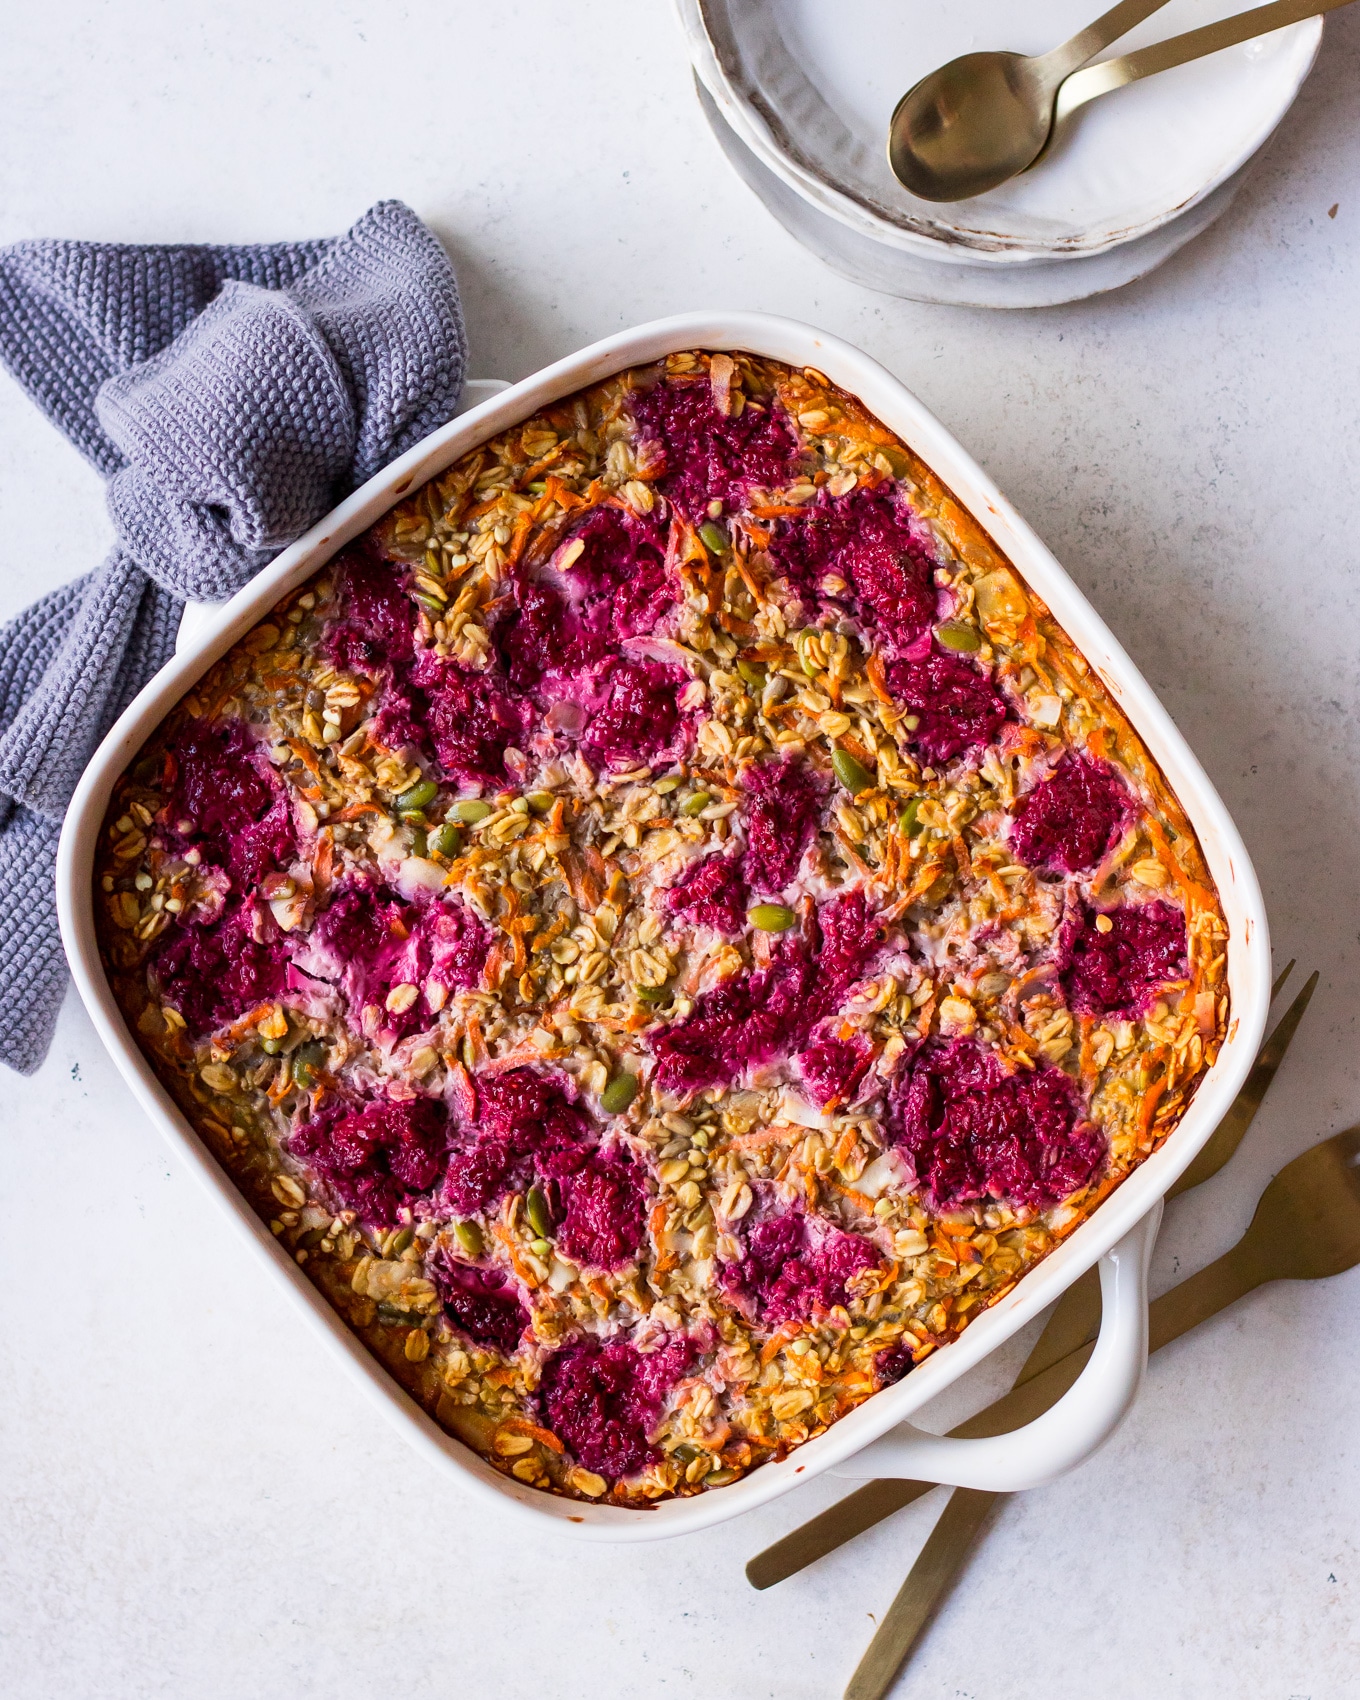 Carrot baked oatmeal with raspberries in white baking dish